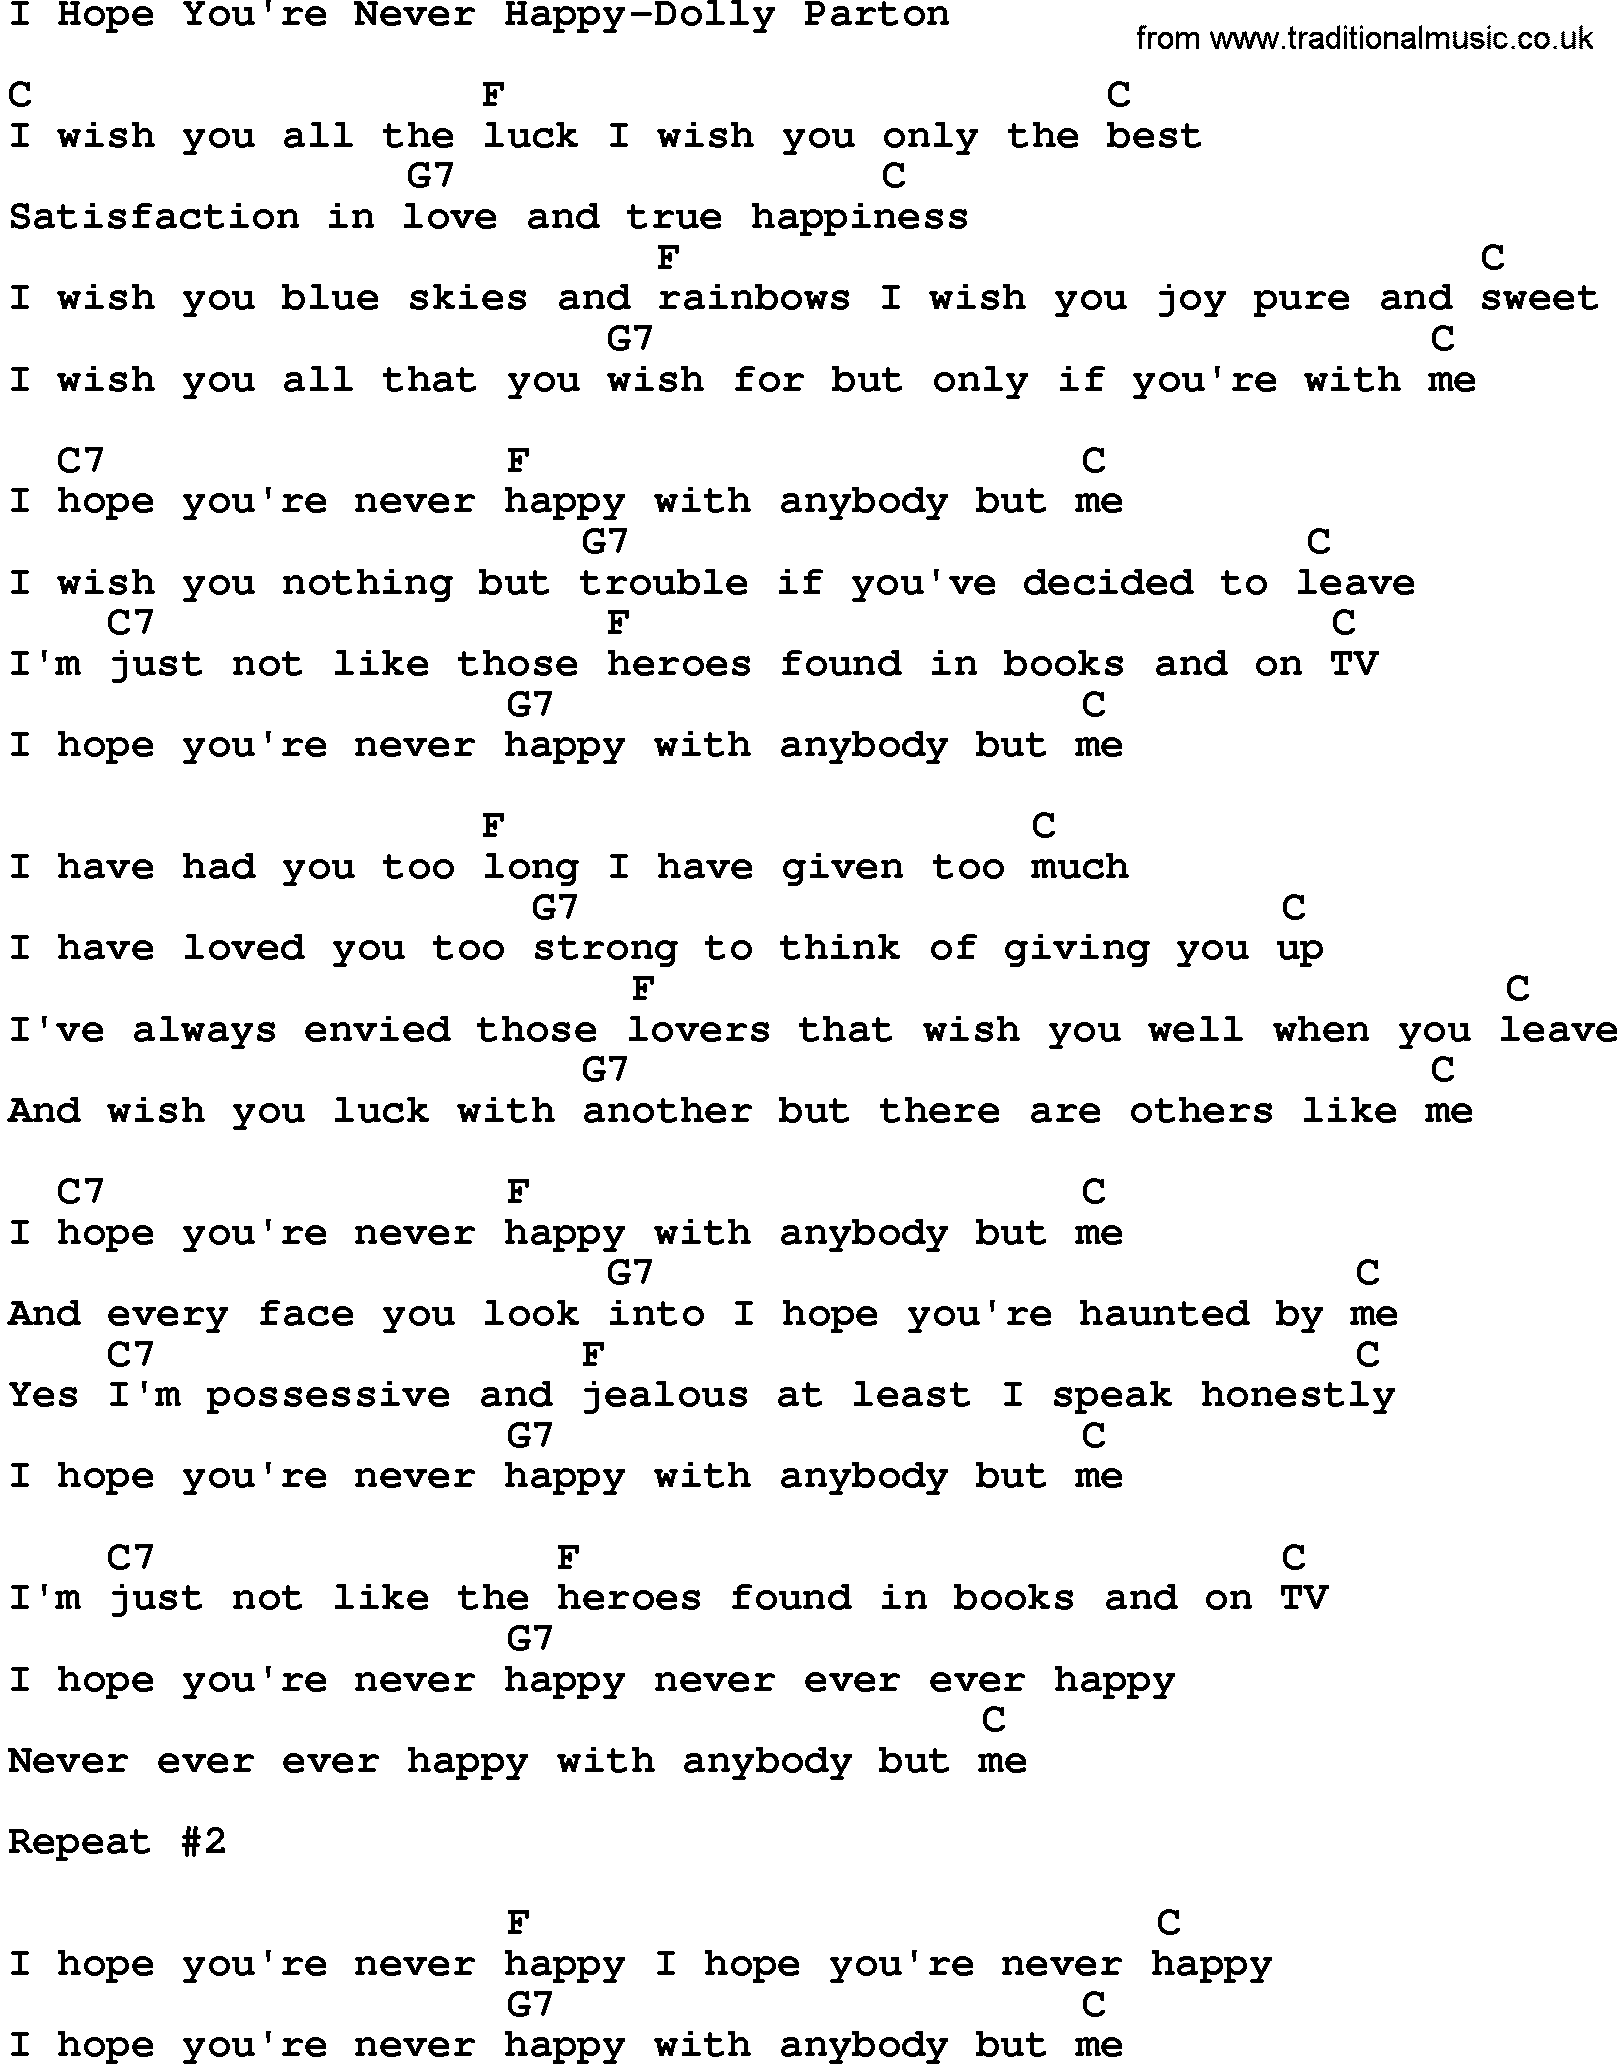 Country music song: I Hope You're Never Happy-Dolly Parton lyrics and chords